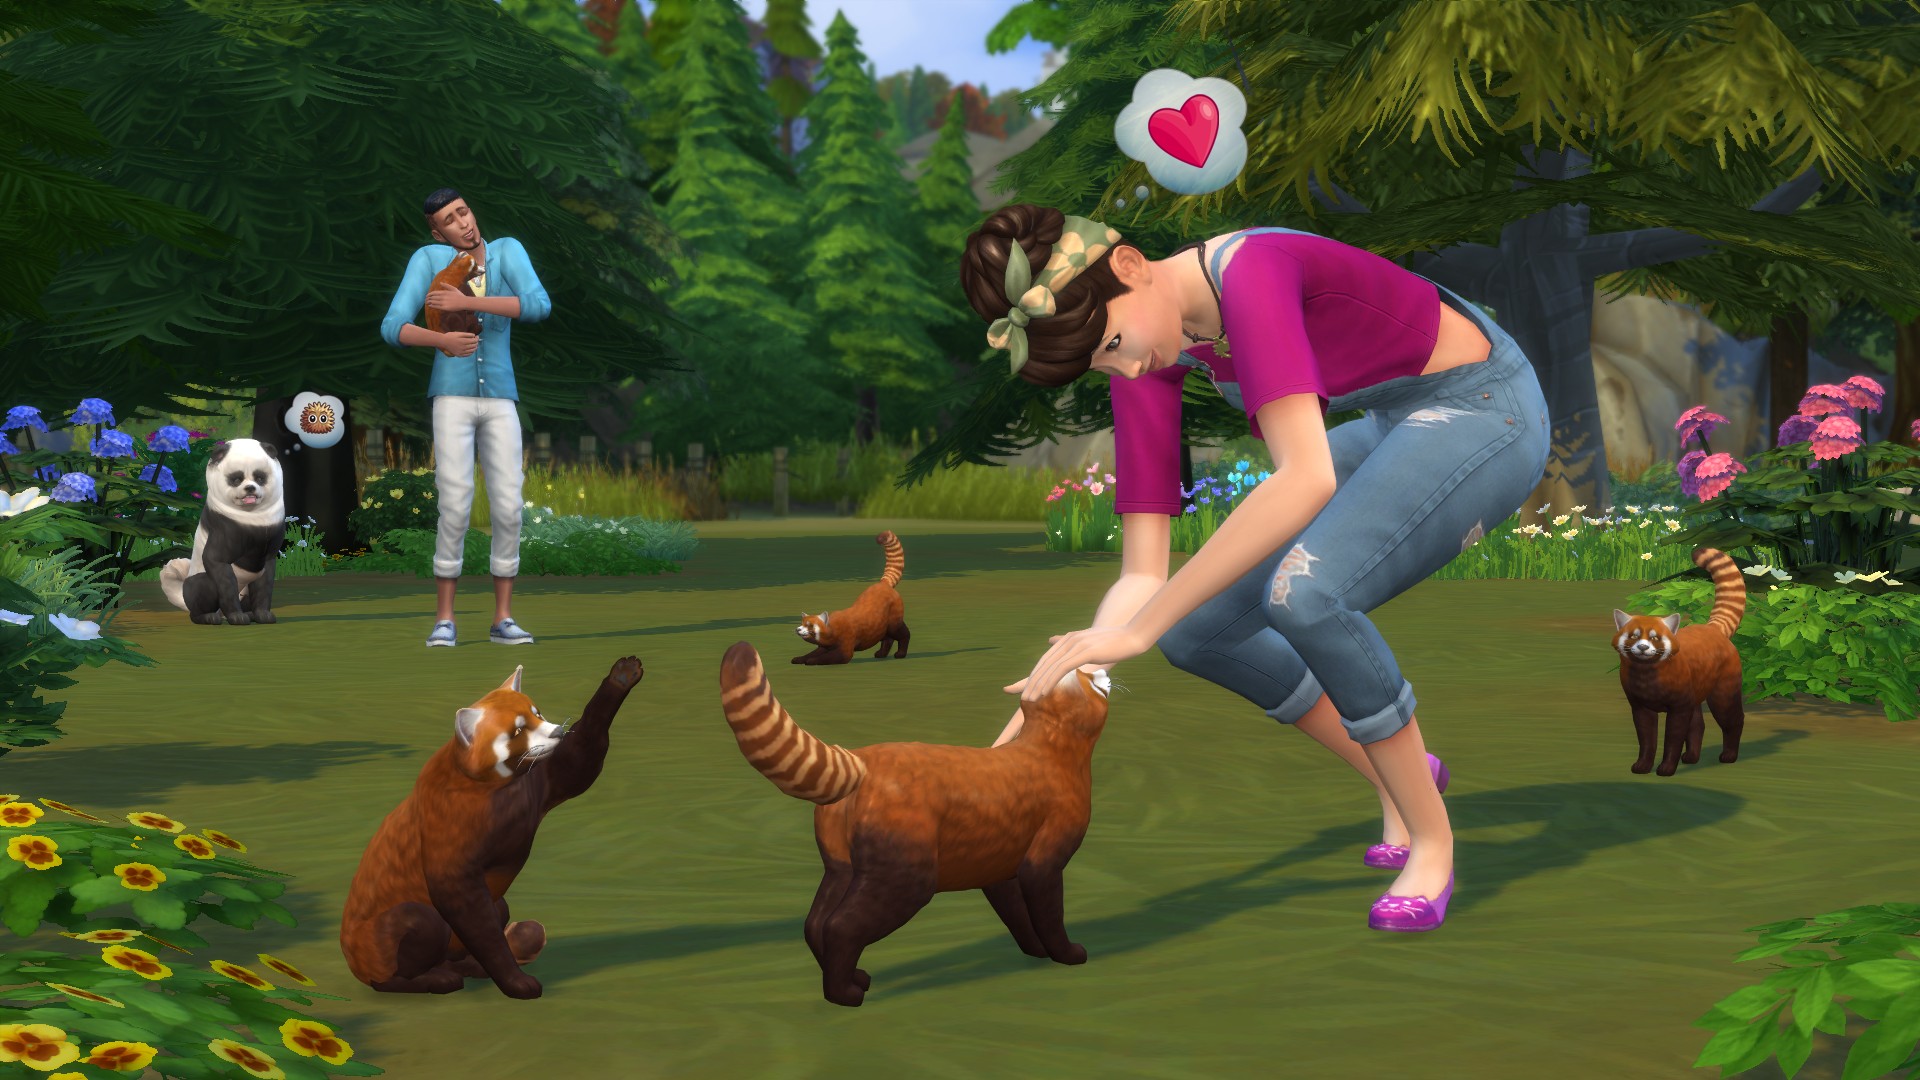 The Sims 4 Cats & Dogs Arriving on Xbox One July 31